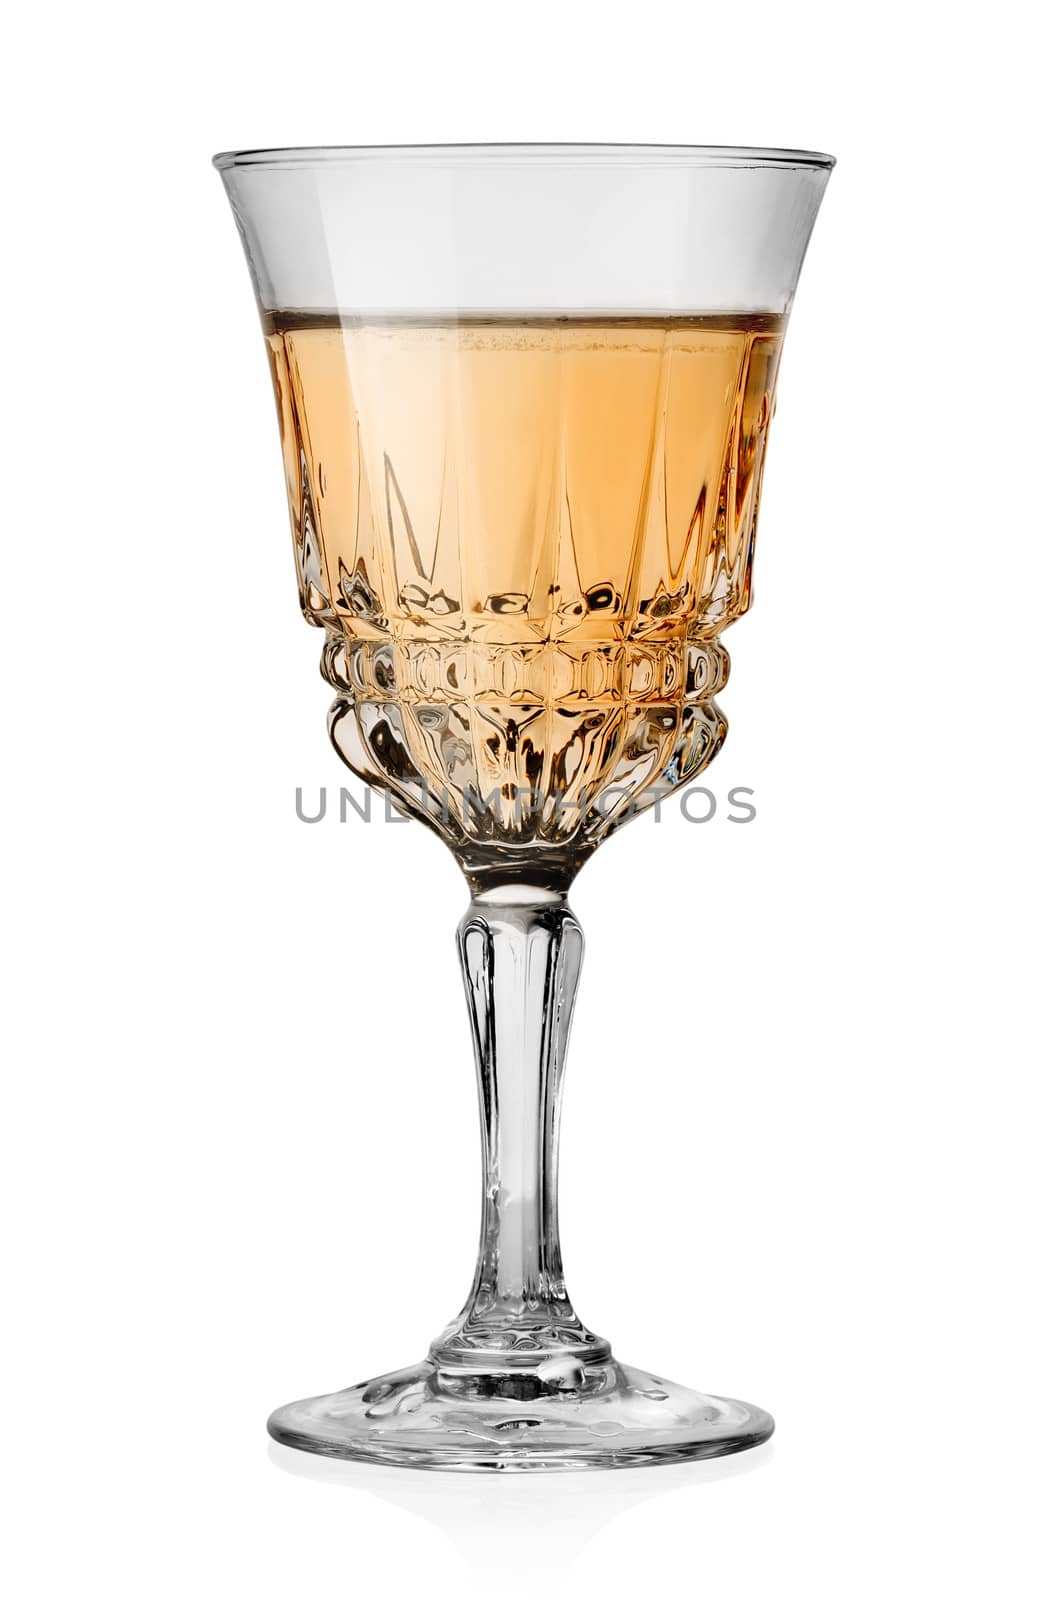 Glass of white wine isolated on white background